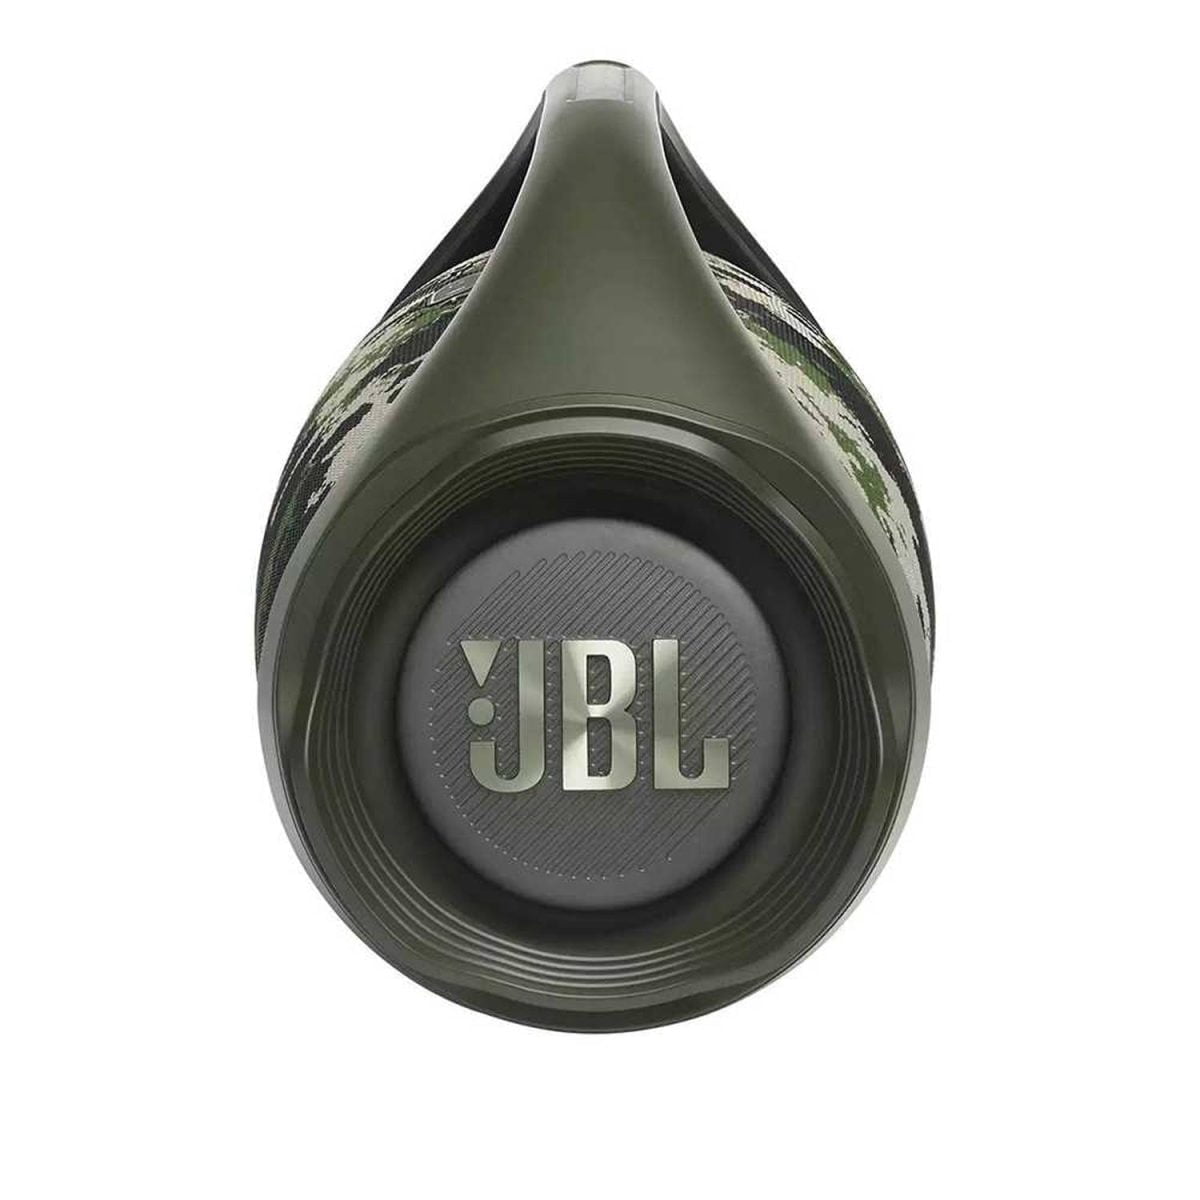 Squad 4 Smart Crop C0 5 0 5 1500X1500 70 Jbl &Lt;H1 Class=&Quot;Product-Title&Quot;&Gt;Jbl Boombox 2 - Portable Bluetooth Speaker&Lt;/H1&Gt; Https://Www.youtube.com/Watch?V=Ht_109Odgru Own The Party. From Backyard Barbecues To Weekend Road Trips, Jbl Boombox 2 Brings It With Monstrous Bass, Bold Design And Up To 24 Hours Of Play Time. Ipx7 Waterproof And Portable, This Powerful Speaker Pumps Out Massive Sound All Day And All Night. Plus, You Can Connect Other Jbl Partyboost-Compatible Speakers To Turn The Party Up. Jbl Boombox 2 Keeps Your Friends Dancing And Its Built-In Powerbank Keeps Your Devices Charged. So You Can Groove From Dusk Till Dawn And Keep Going Strong! &Lt;B&Gt;We Also Provide International Wholesale And Retail Shipping To All Gcc Countries: Saudi Arabia, Qatar, Oman, Kuwait, Bahrain.&Lt;/B&Gt; Jbl Boombox 2 Jbl Boombox 2 - Portable Bluetooth Speaker Squad